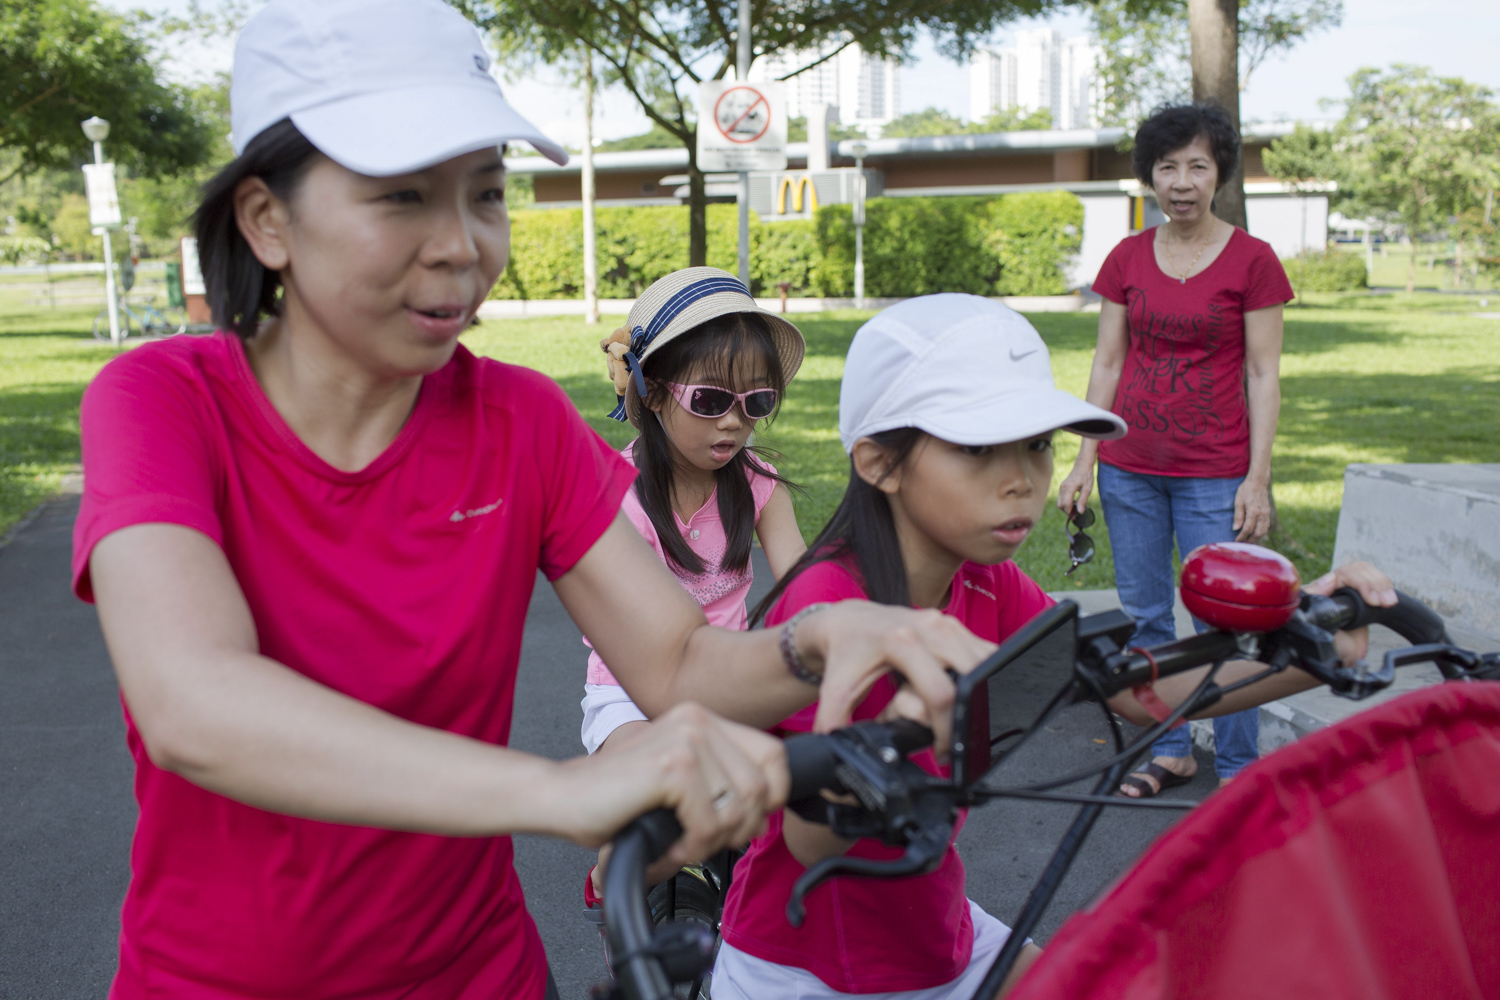 On another day, Dorothy borrowed an elder-friendly trishaw from Cycling Without Age to take her mother and a neighbour out on a ride around Bishan Park – a rare treat. The girls try their hand at steering the wheel.